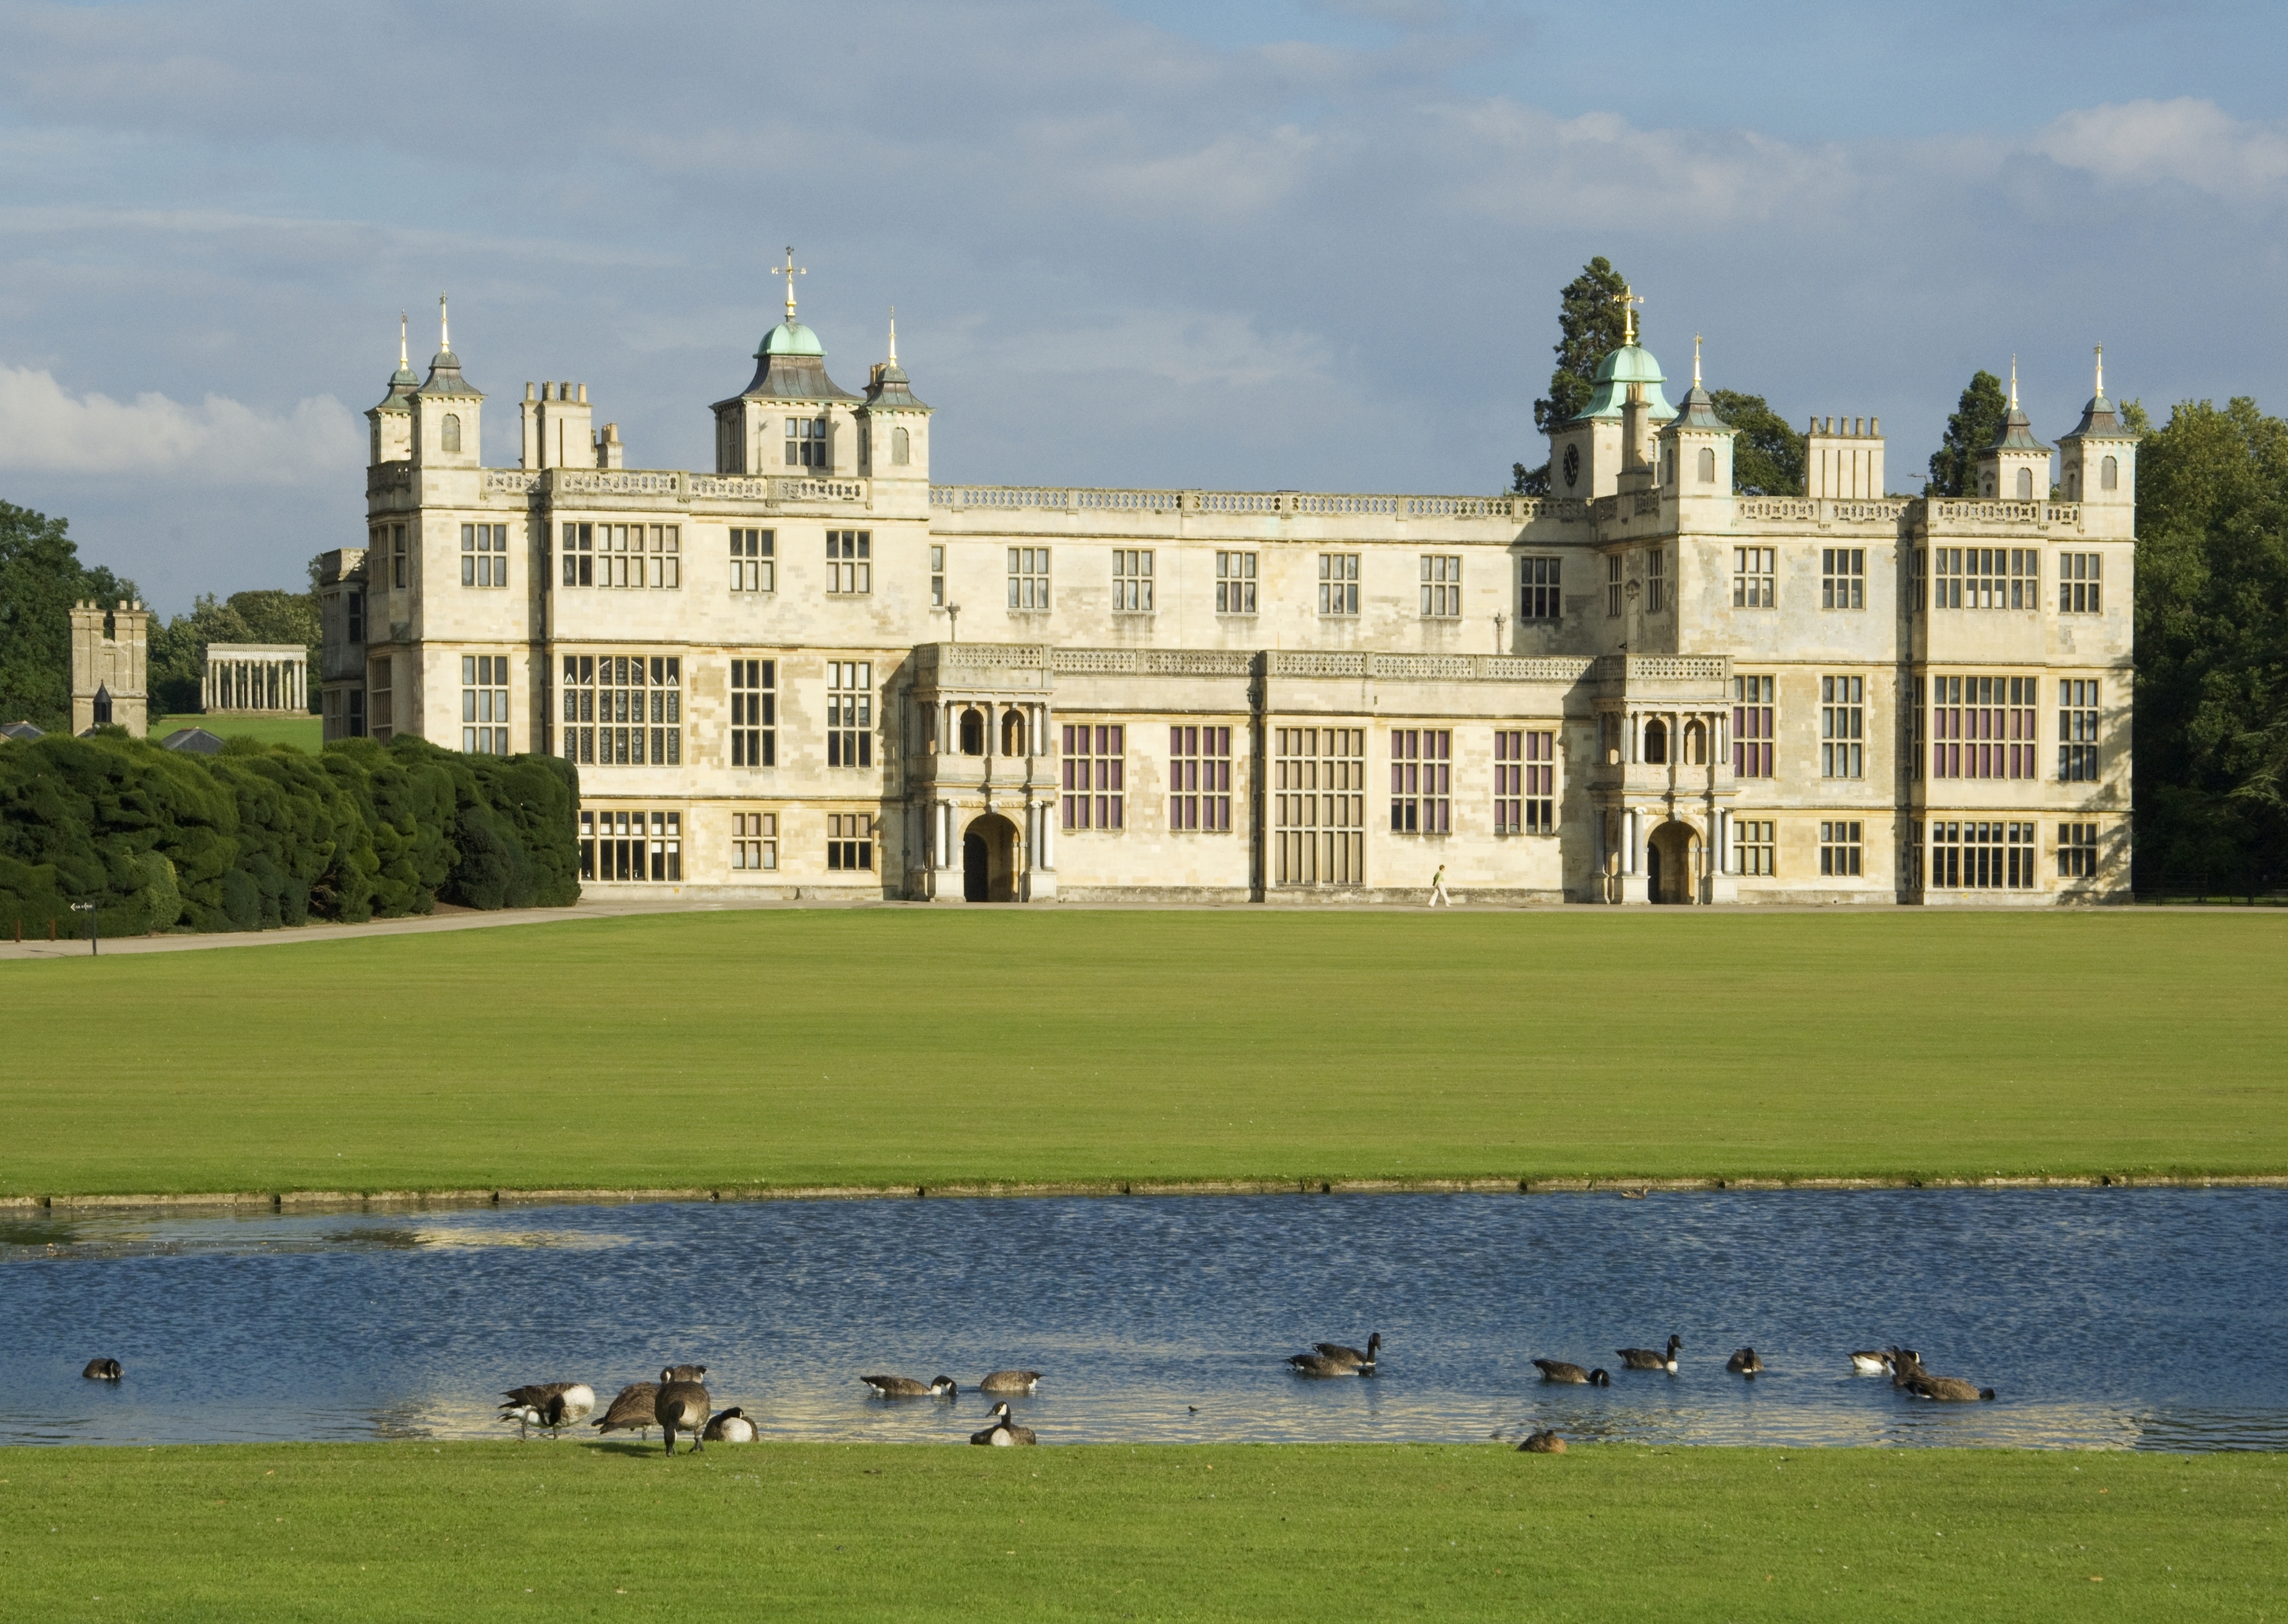 Audley End House in Essex. (English Heritage/ PA)